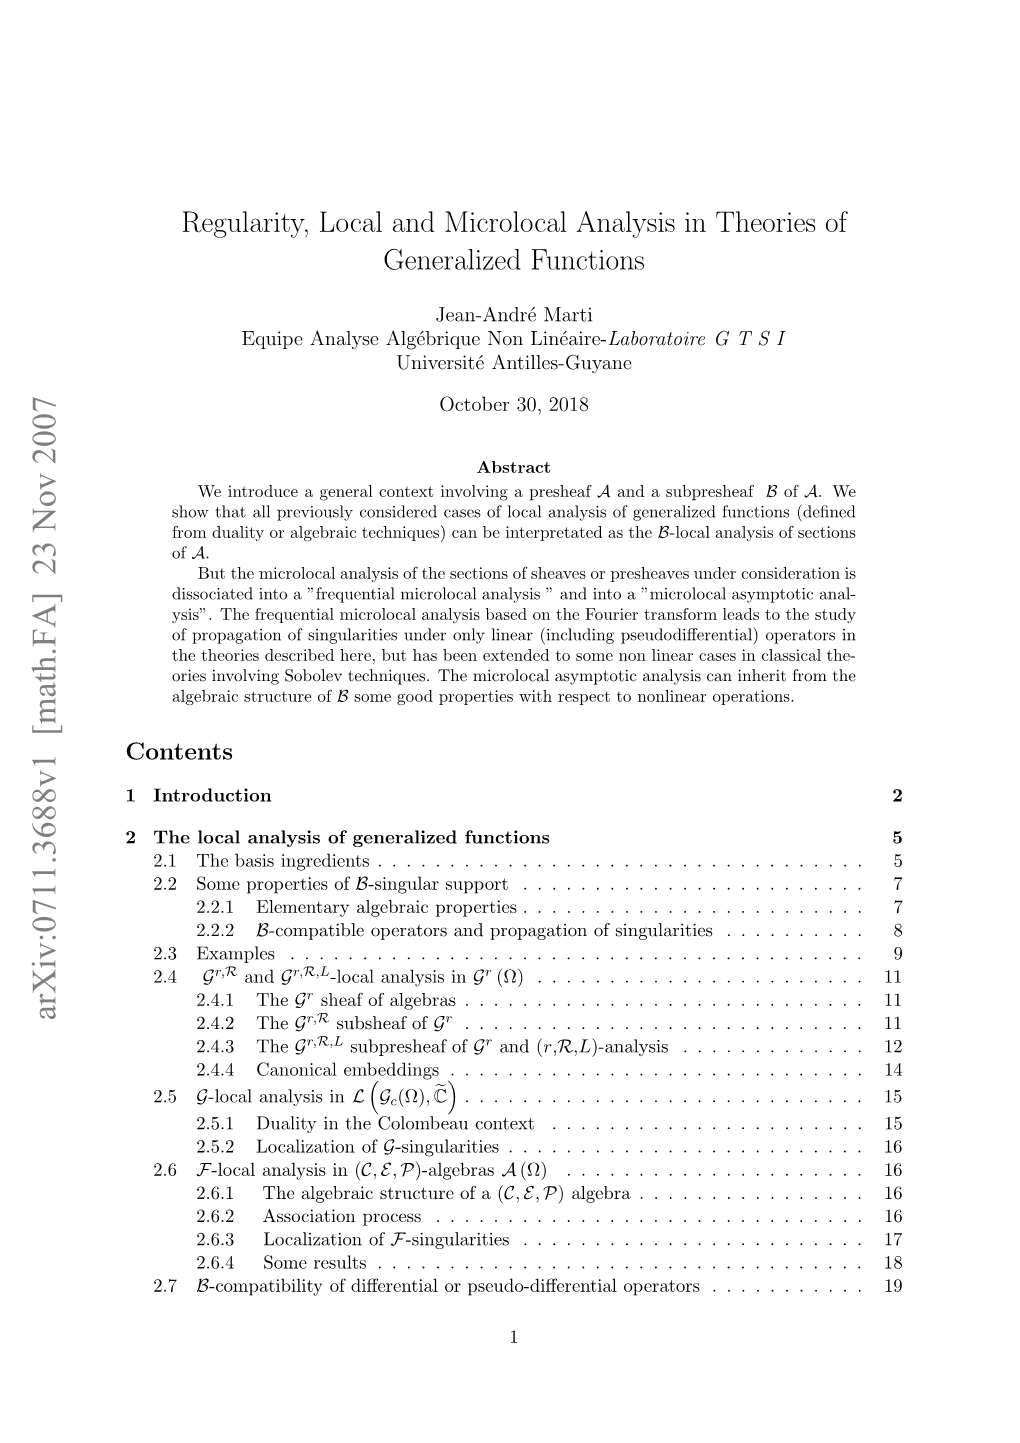 Regularity, Local and Microlocal Analysis in Theories of Generalized